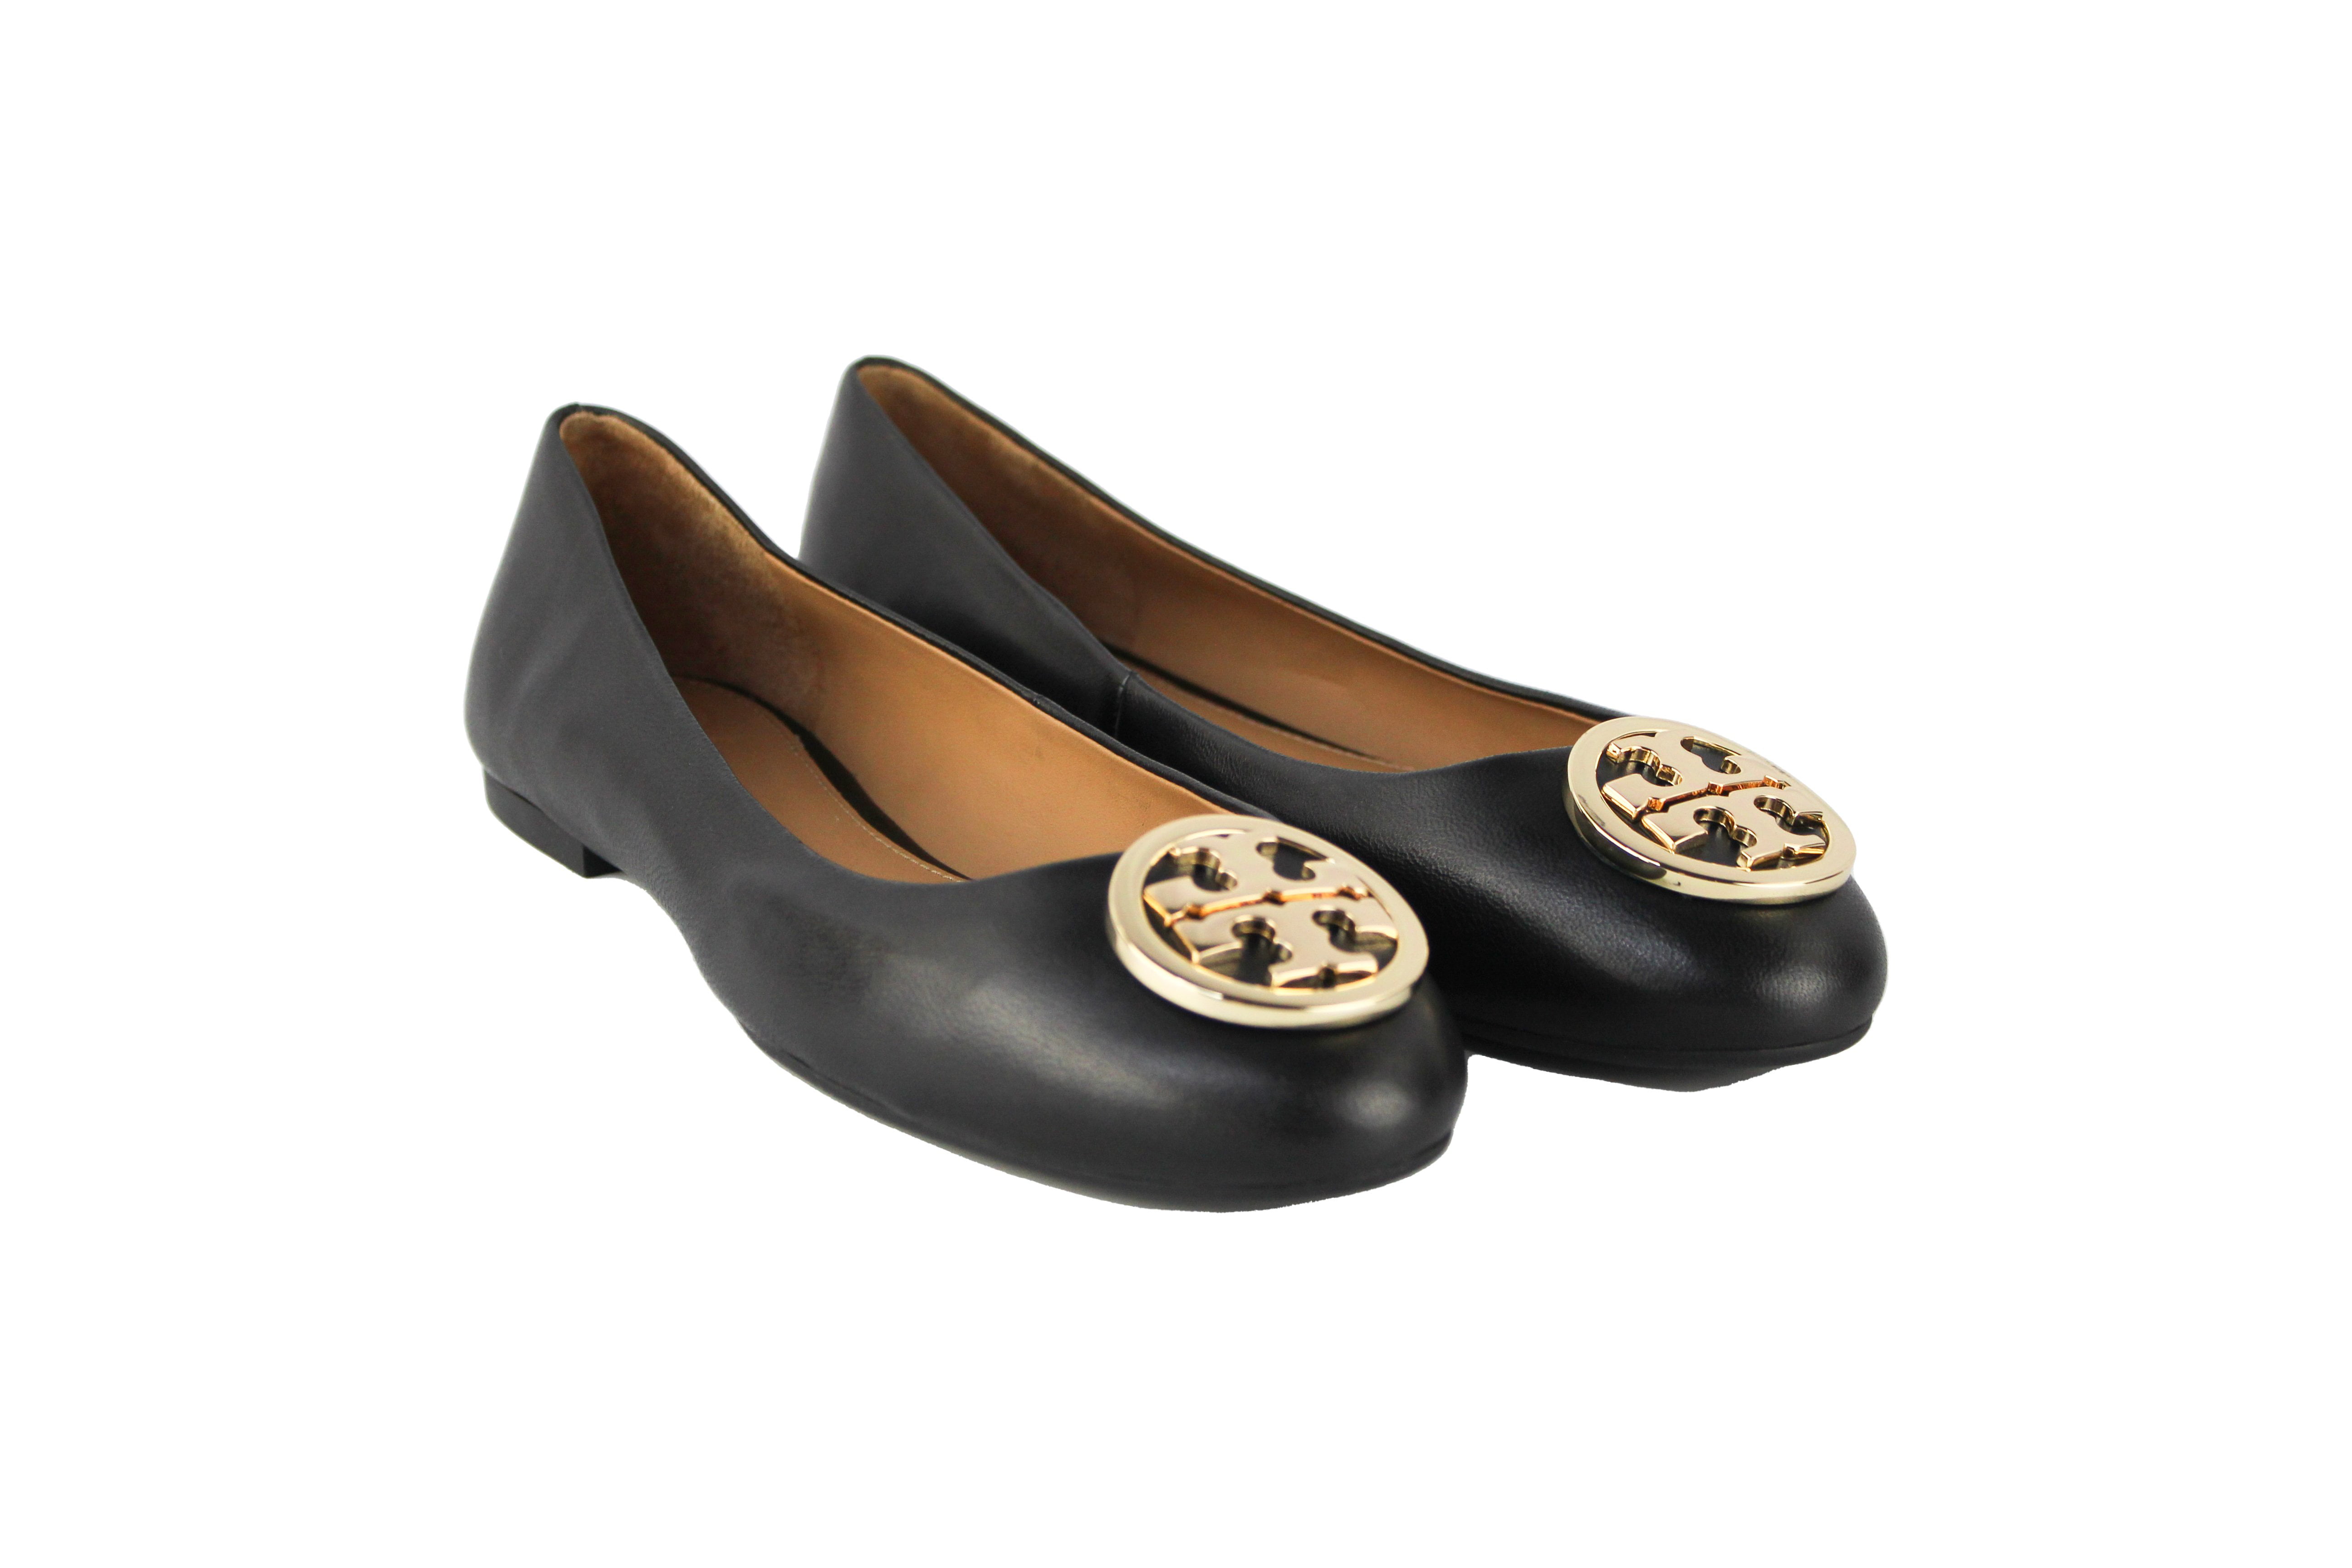 Buy Tory Burch 64090 Benton 2 Black Nappa Leather Ballet Flat Slip On Shoes  Online at Lowest Price in Ubuy France. 434739687